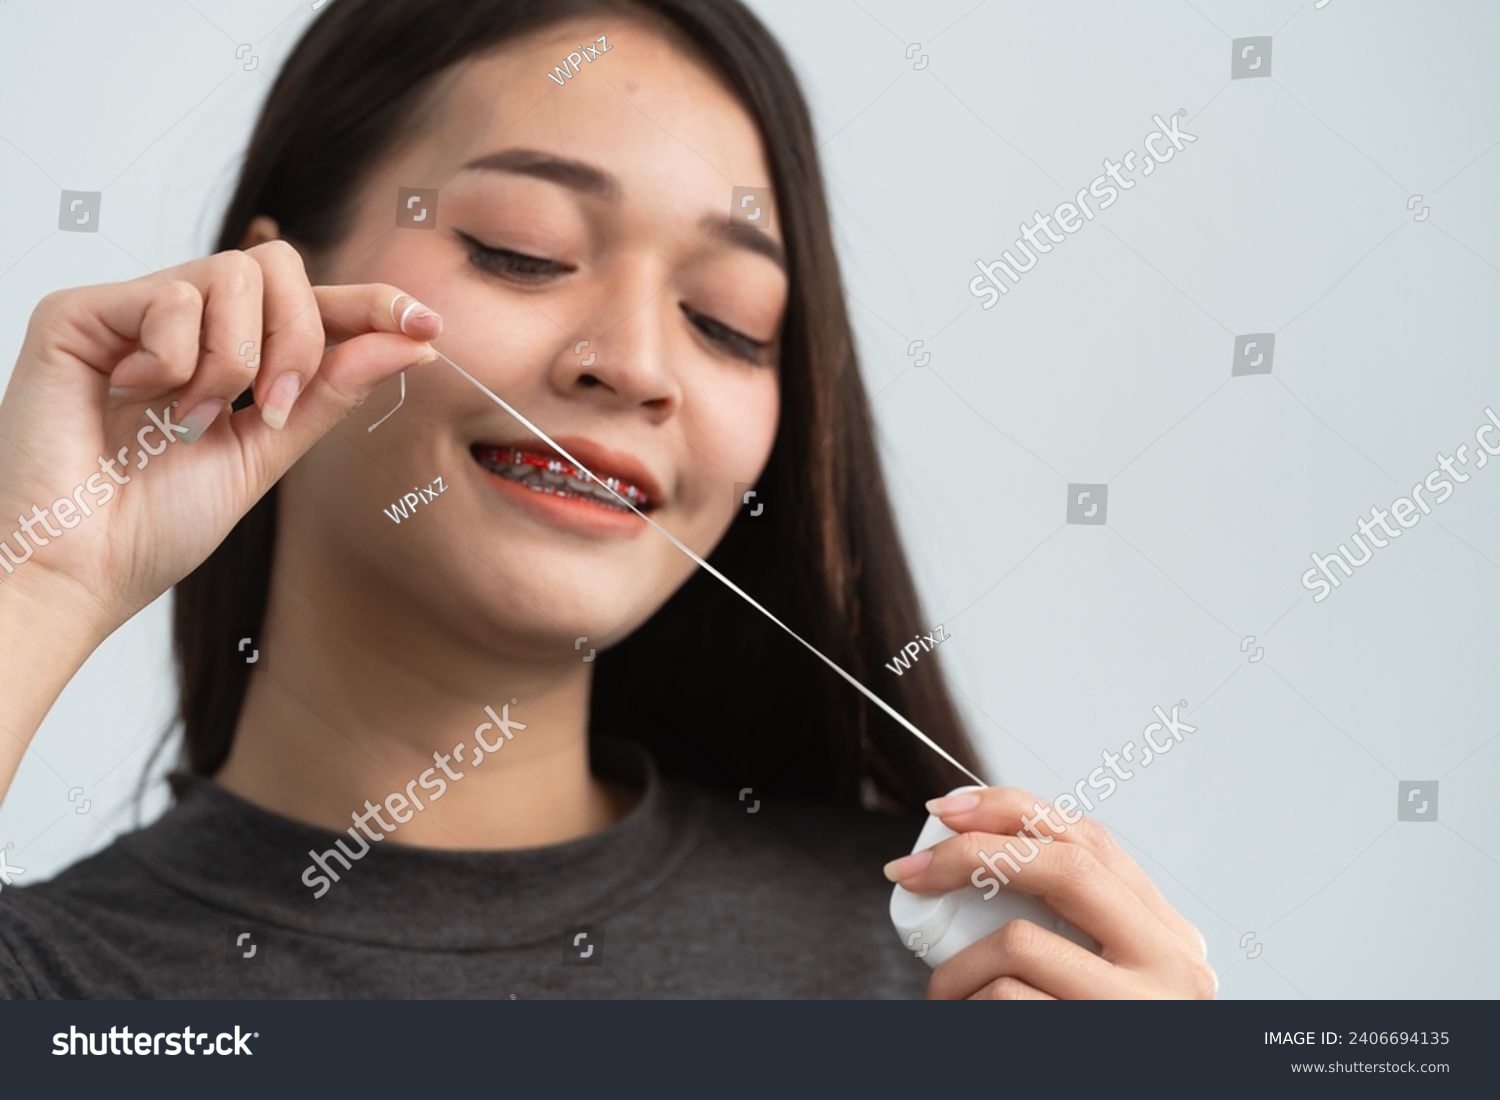 Asian woman braces using dental floss. Teeth braces on the white teeth of women to equalize the teeth. Bracket system in smiling mouth, close up photo teeth, macro shot, dentist health concept. #2406694135